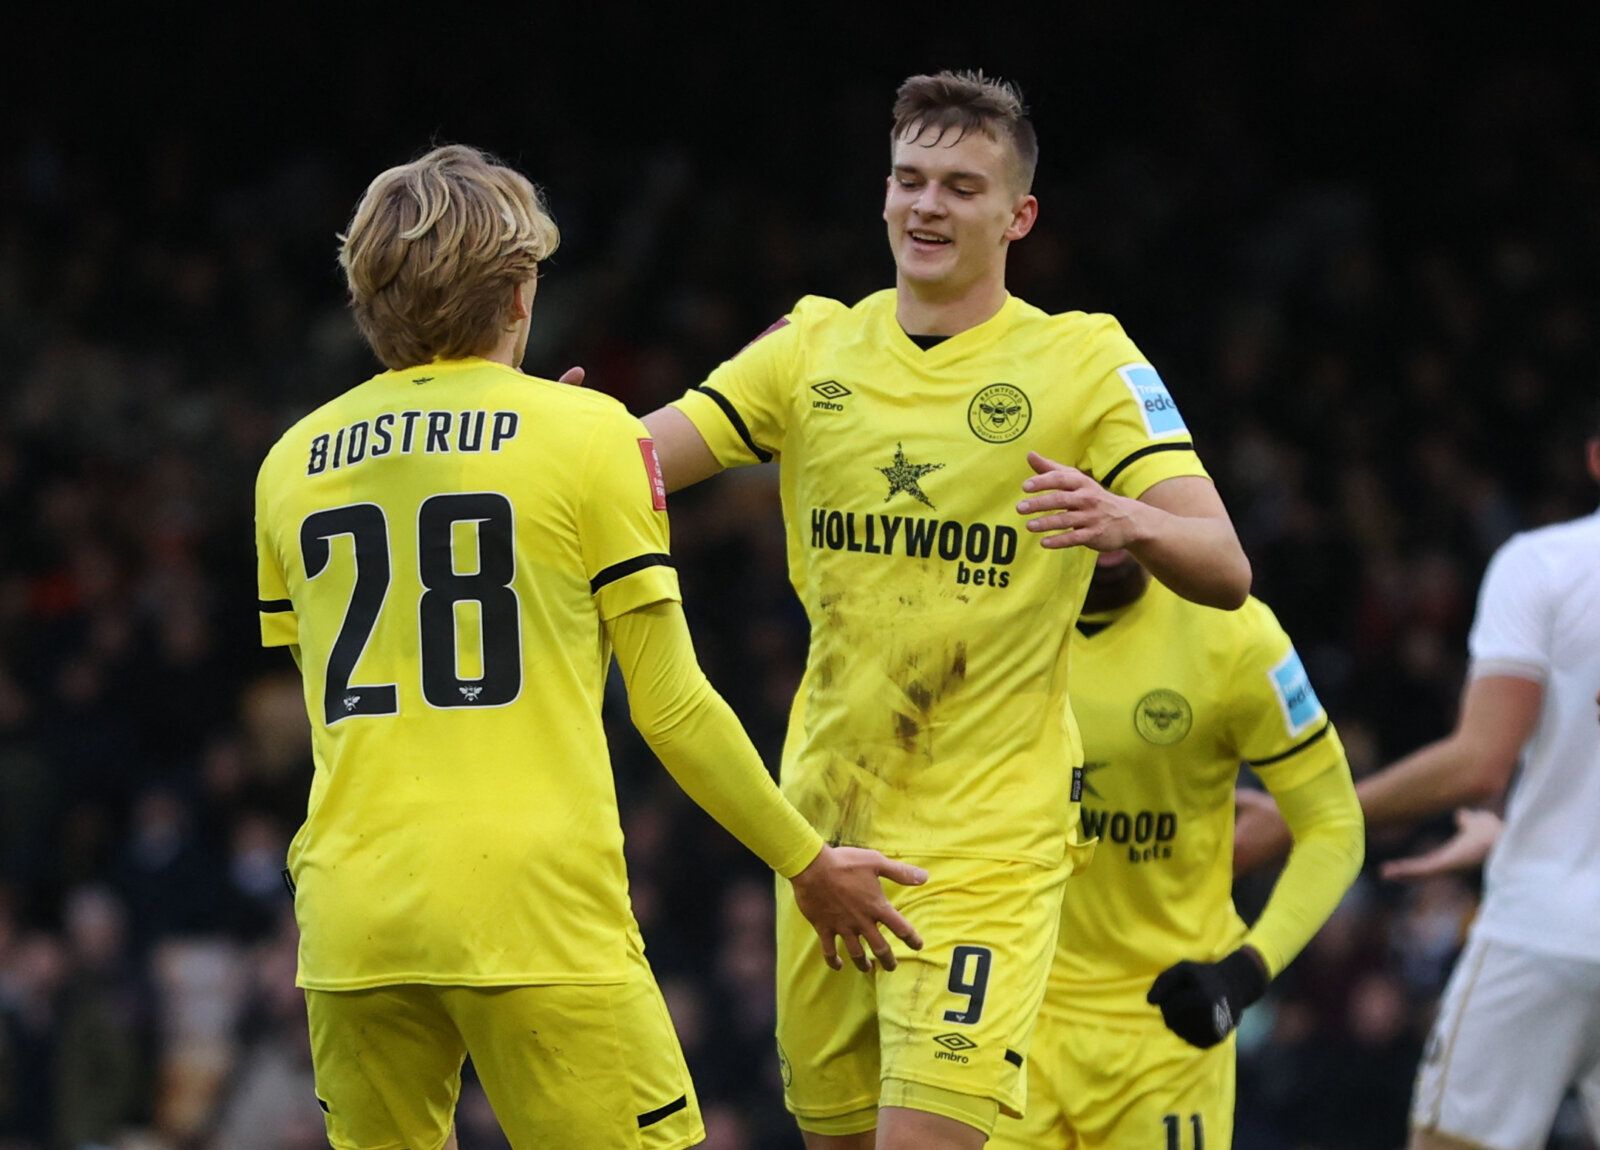 Soccer Football - FA Cup Third Round - Port Vale v Brentford - Vale Park, Stoke-on-Trent, Britain - January 8, 2022  Brentford's Marcus Forss celebrates scoring their first goal with Mads Bidstrup Action Images via Reuters/Molly Darlington